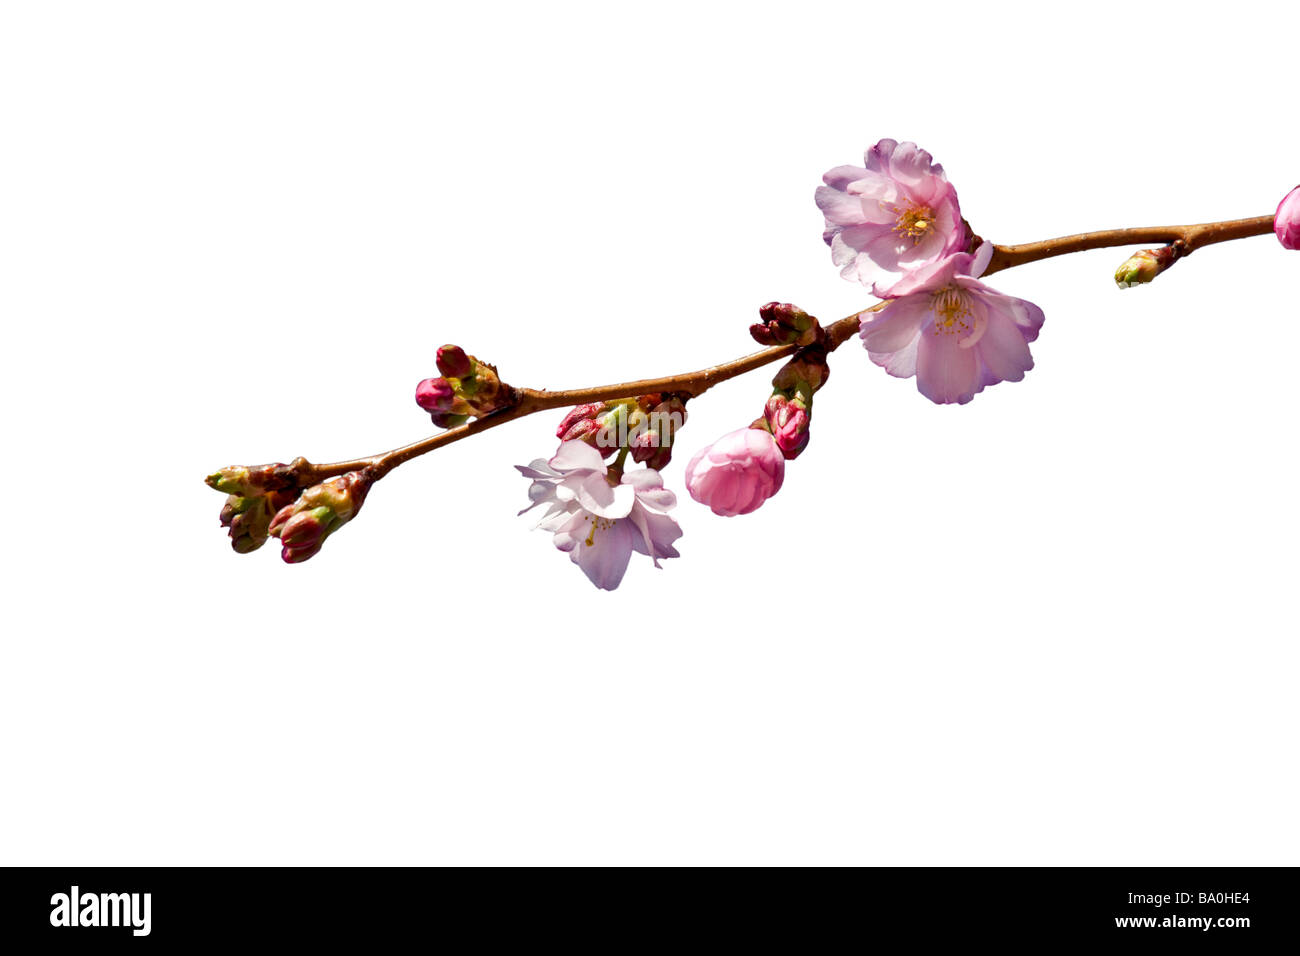 Single branch of Prunus Accolade, ornamental cherry tree in bloom on white background Stock Photo